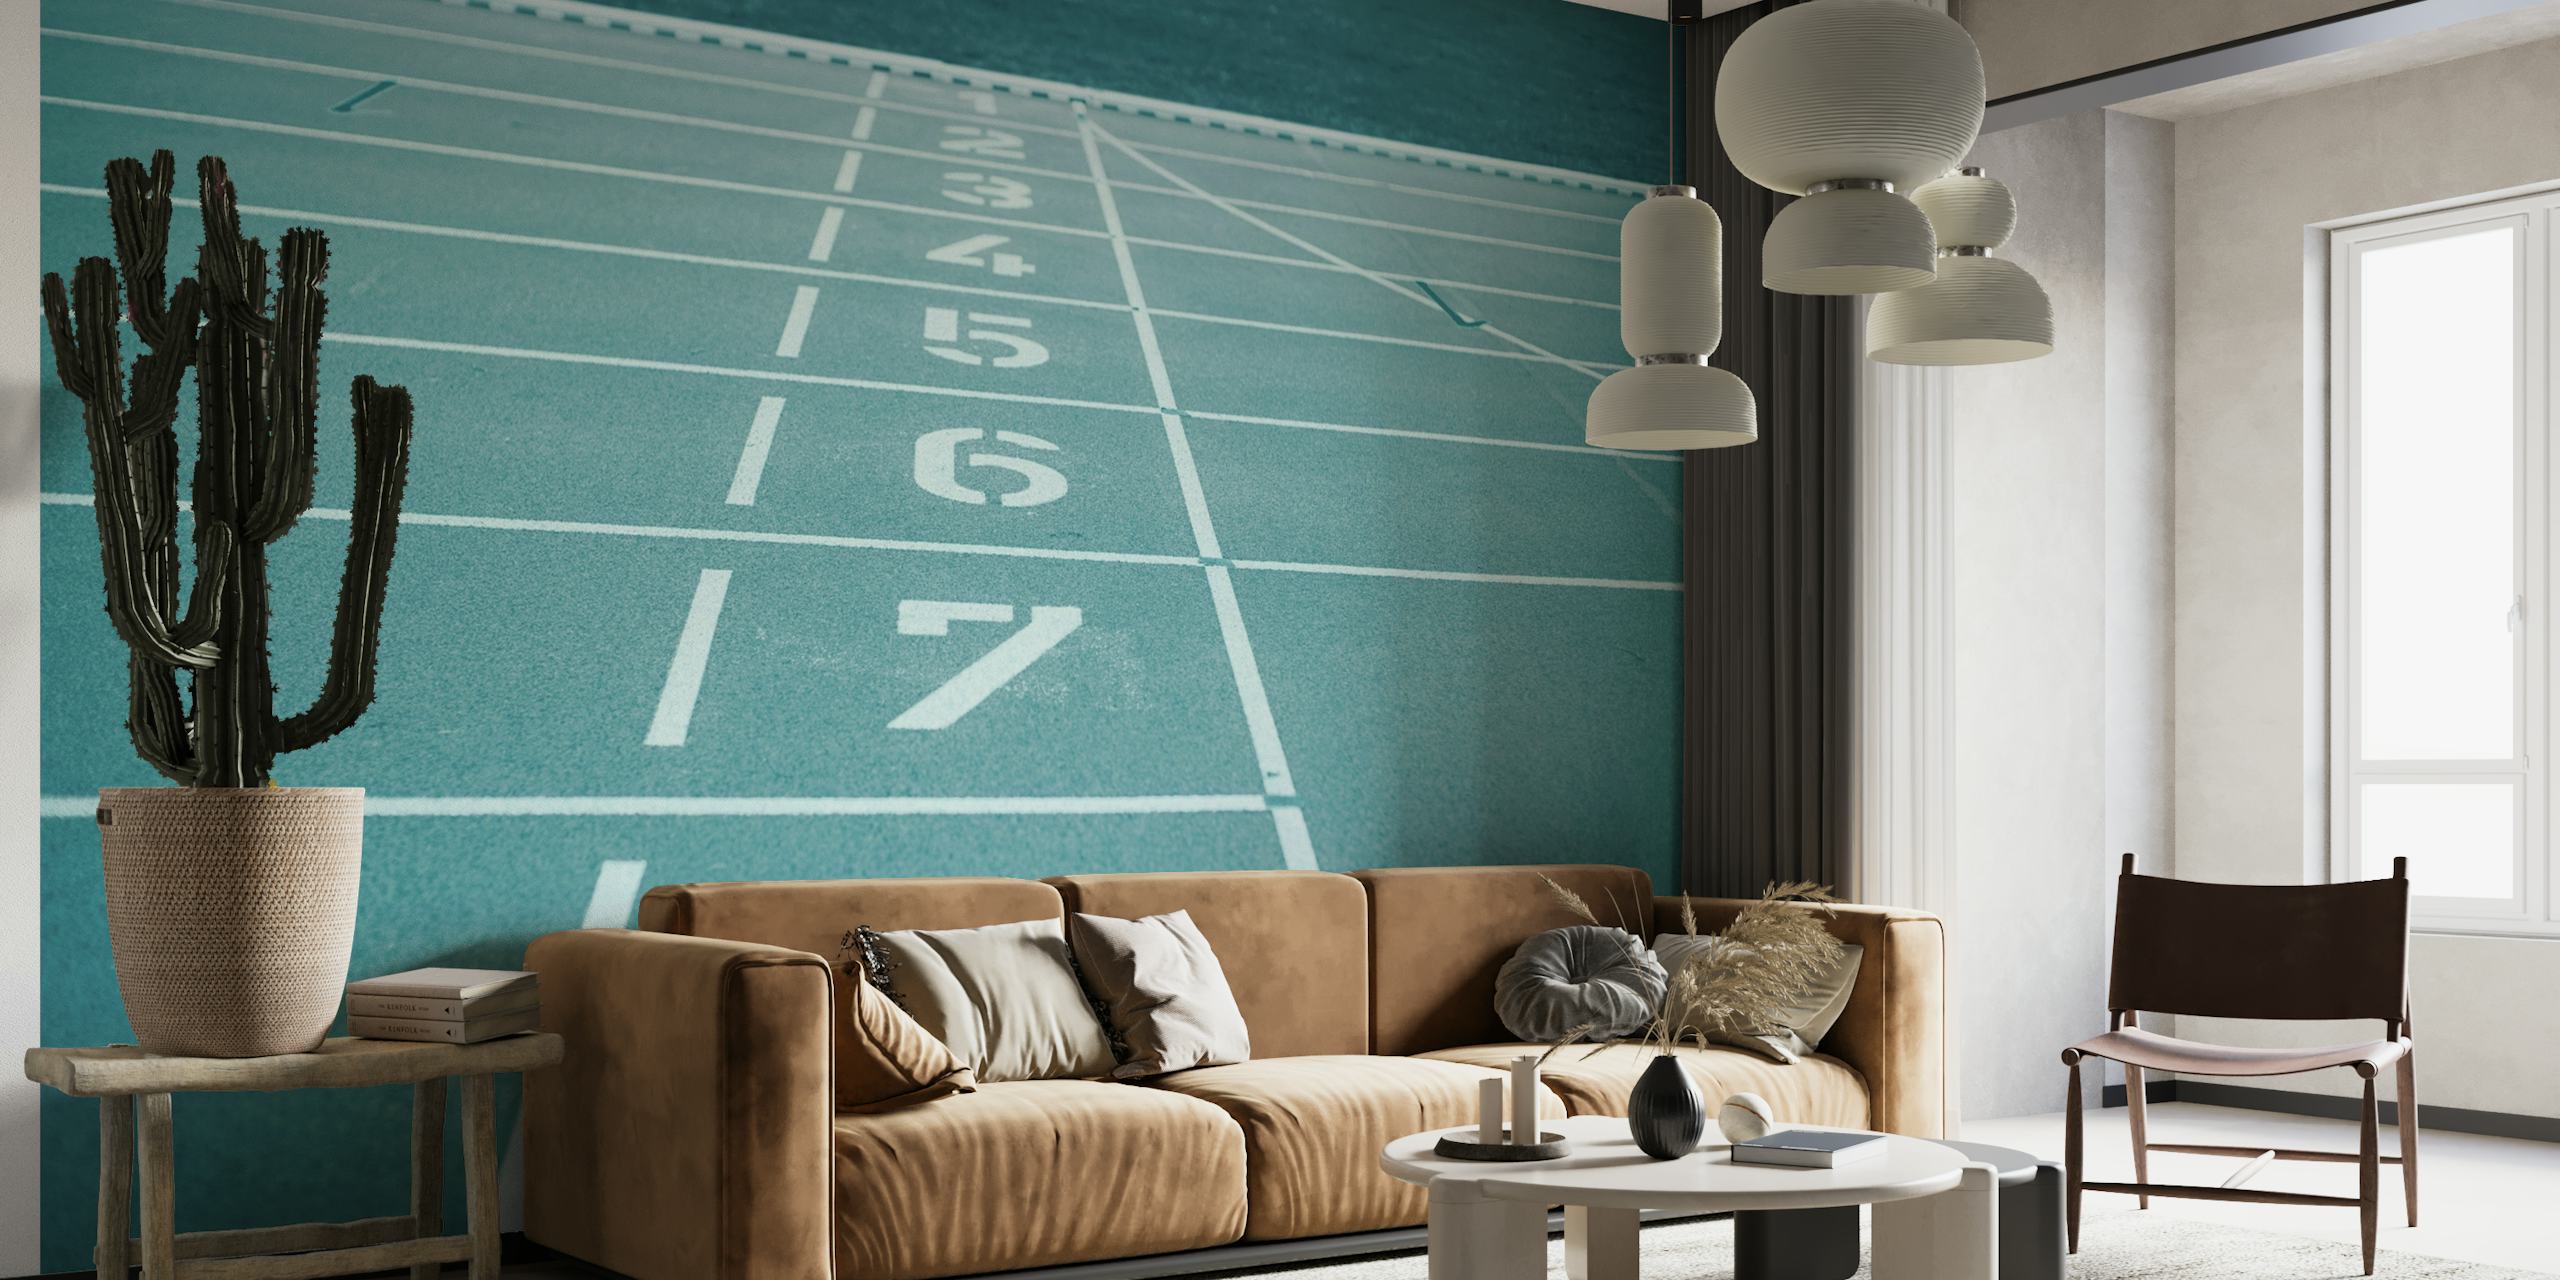 Retro vintage wall mural of a sports stadium track with faded numbers and lines